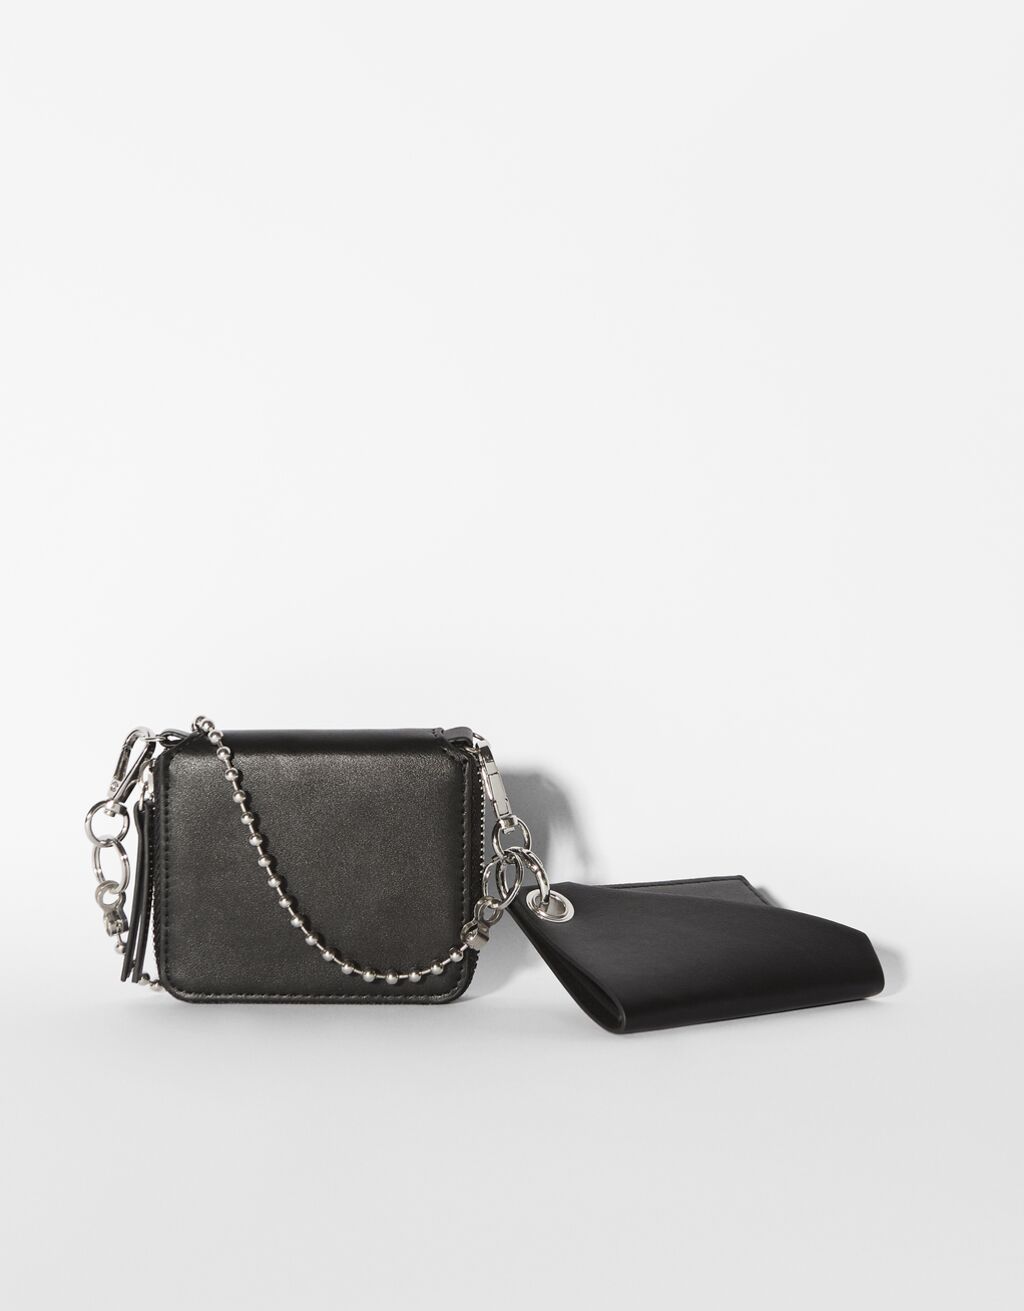 Contrast purse with chain